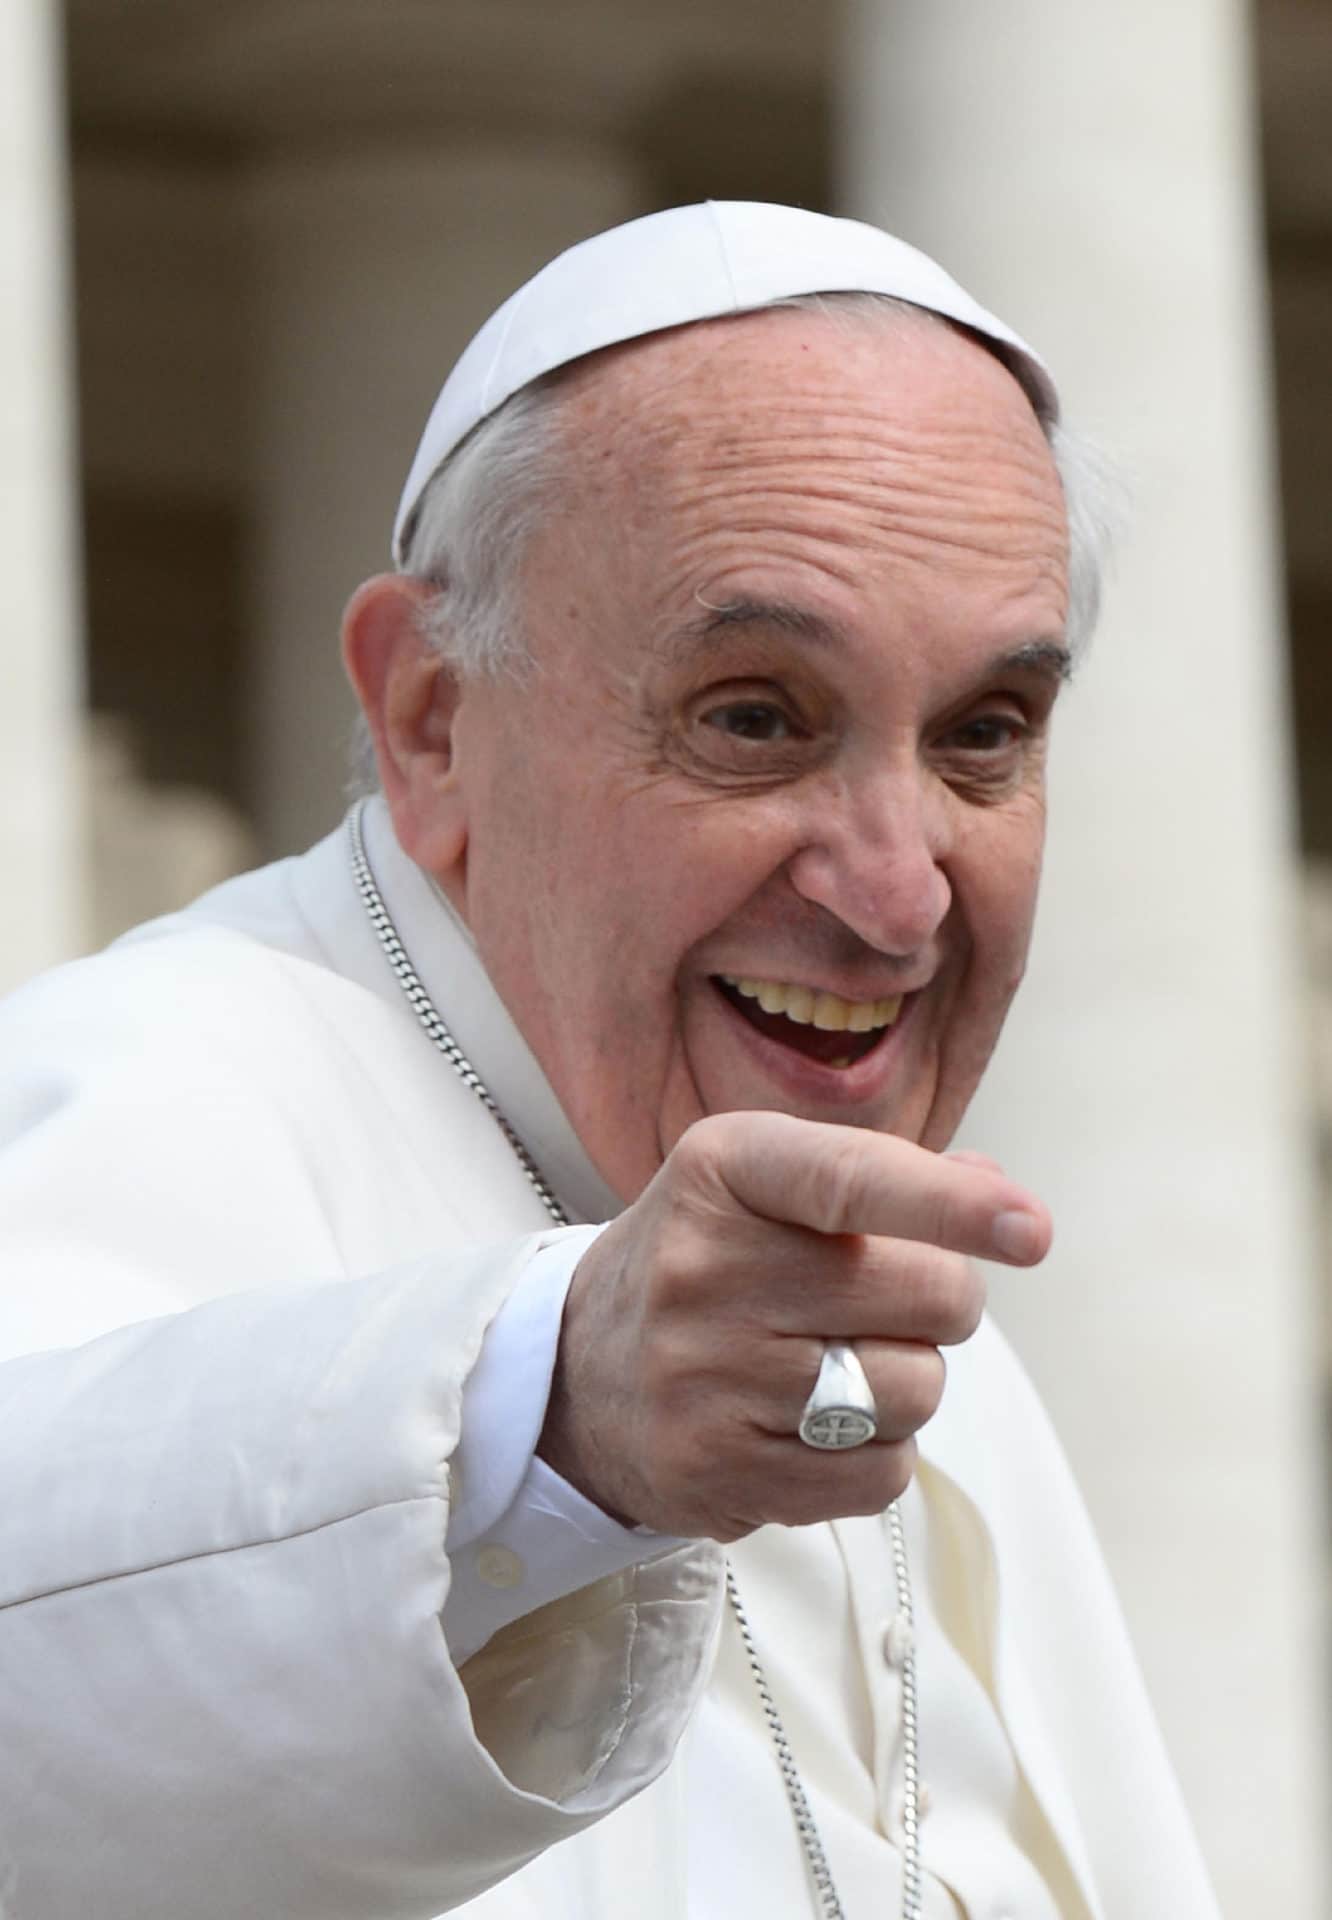 Francis is the third of the three modern popes to shape catholic social teaching.